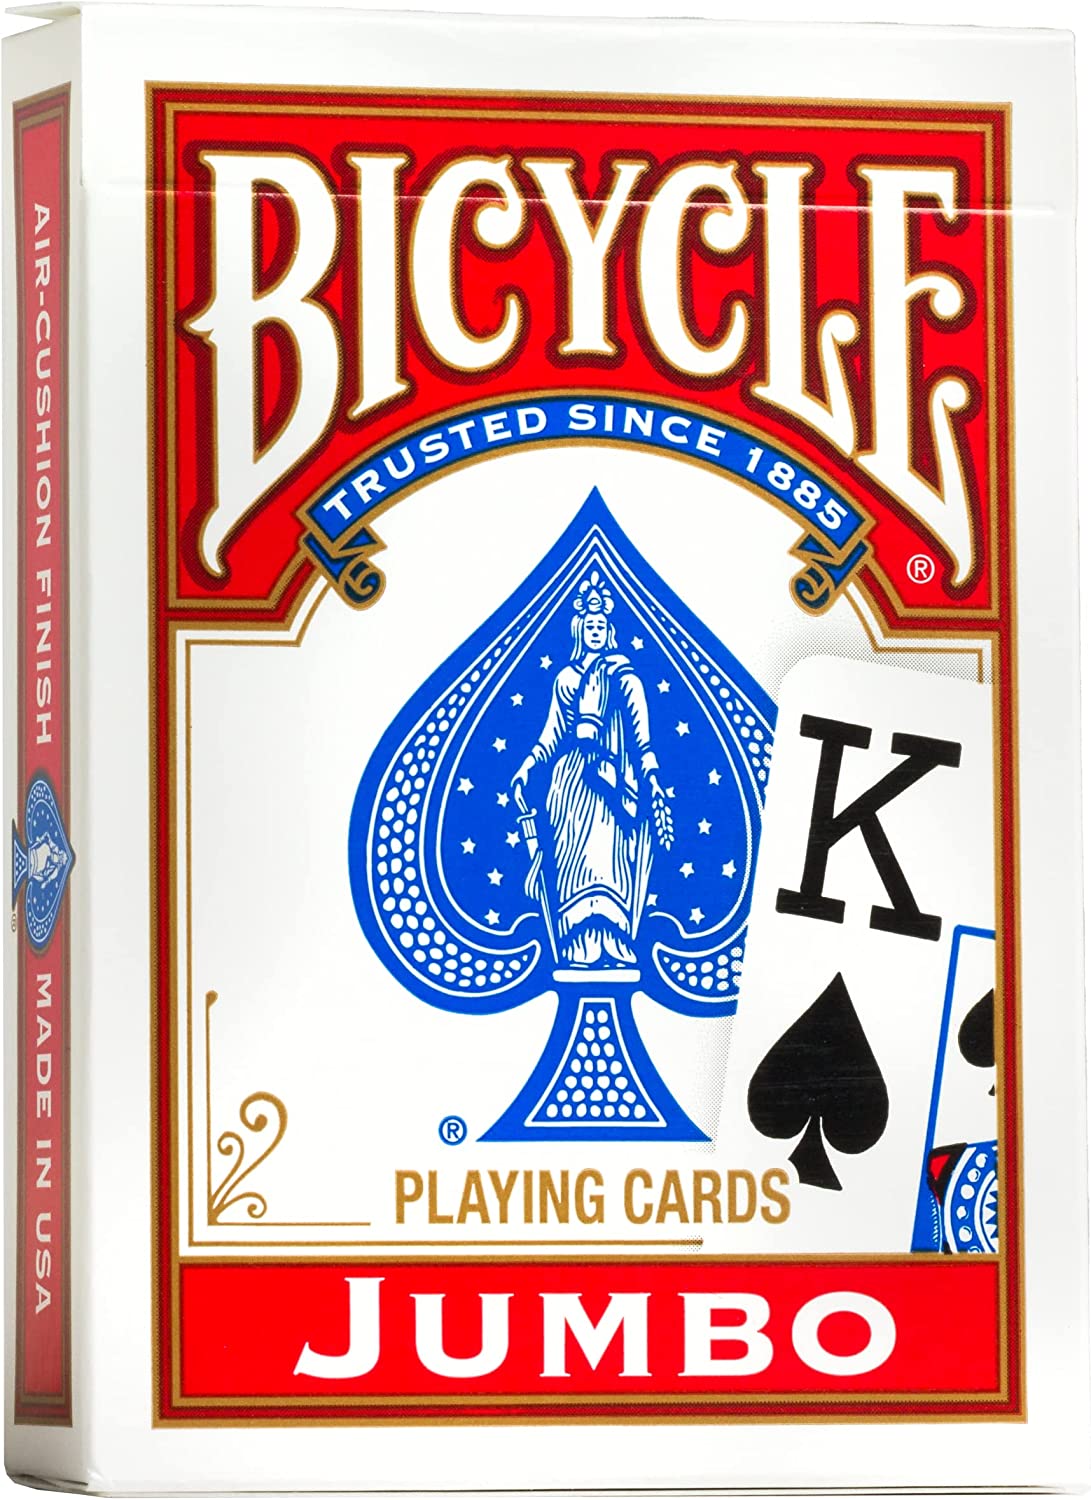 Bicycle Standard Jumbo Playing Cards - Poker, Rummy, Euchre, Pinochle, Card Games, Ages 3+